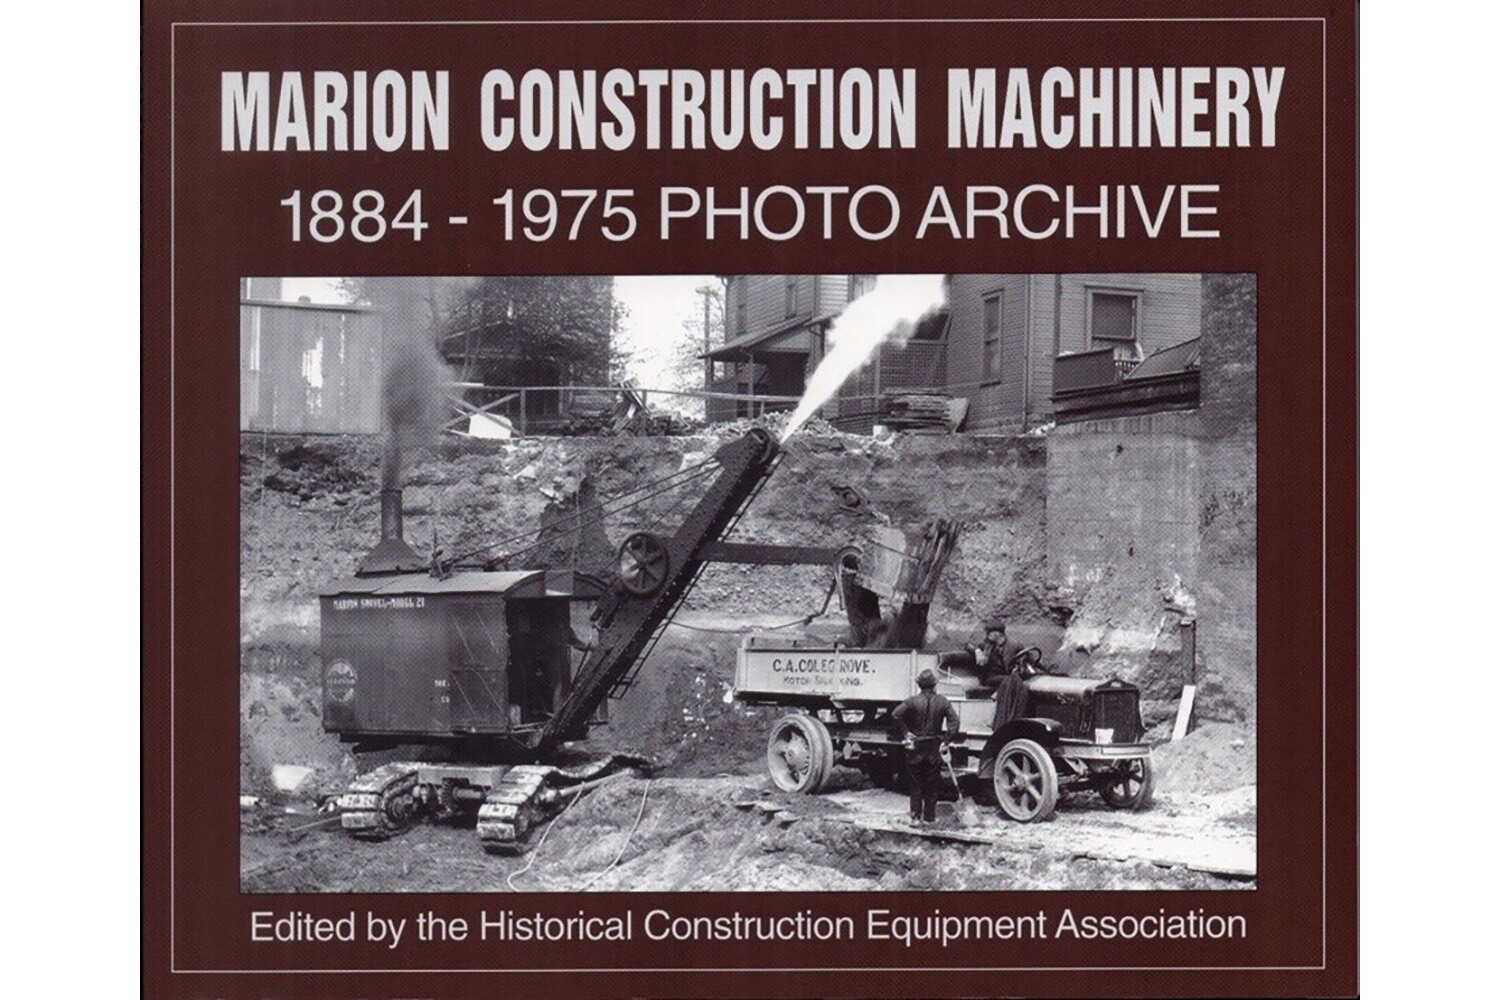 Marion Construction Machinery - 1884-1975 Archive - HCEA